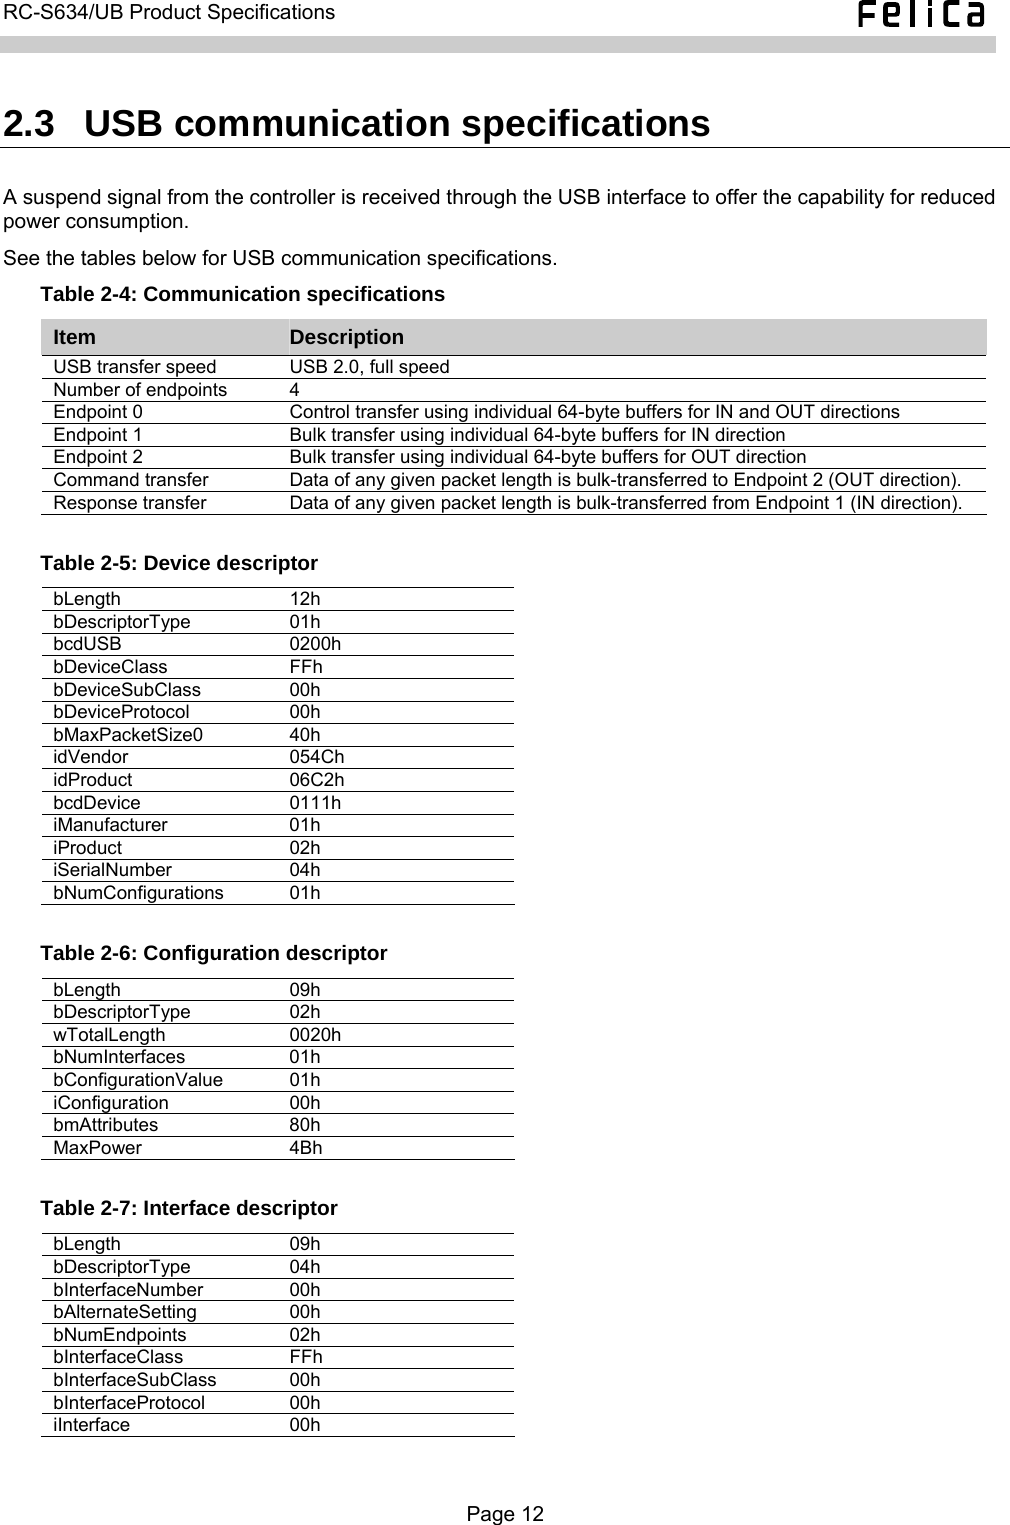   RC-S634/UB Product Specifications  2.3  USB communication specifications A suspend signal from the controller is received through the USB interface to offer the capability for reduced power consumption. See the tables below for USB communication specifications. Table 2-4: Communication specifications Item  Description USB transfer speed  USB 2.0, full speed Number of endpoints  4 Endpoint 0  Control transfer using individual 64-byte buffers for IN and OUT directions Endpoint 1  Bulk transfer using individual 64-byte buffers for IN direction Endpoint 2  Bulk transfer using individual 64-byte buffers for OUT direction Command transfer  Data of any given packet length is bulk-transferred to Endpoint 2 (OUT direction). Response transfer  Data of any given packet length is bulk-transferred from Endpoint 1 (IN direction).  Table 2-5: Device descriptor bLength 12h bDescriptorType 01h bcdUSB 0200h bDeviceClass FFh bDeviceSubClass 00h bDeviceProtocol 00h bMaxPacketSize0 40h idVendor 054Ch idProduct 06C2h bcdDevice 0111h iManufacturer 01h iProduct 02h iSerialNumber 04h bNumConfigurations 01h  Table 2-6: Configuration descriptor bLength 09h bDescriptorType 02h wTotalLength 0020h bNumInterfaces 01h bConfigurationValue 01h iConfiguration 00h bmAttributes 80h MaxPower 4Bh  Table 2-7: Interface descriptor bLength 09h bDescriptorType 04h bInterfaceNumber 00h bAlternateSetting 00h bNumEndpoints 02h bInterfaceClass FFh bInterfaceSubClass 00h bInterfaceProtocol 00h iInterface 00h   Page 12  